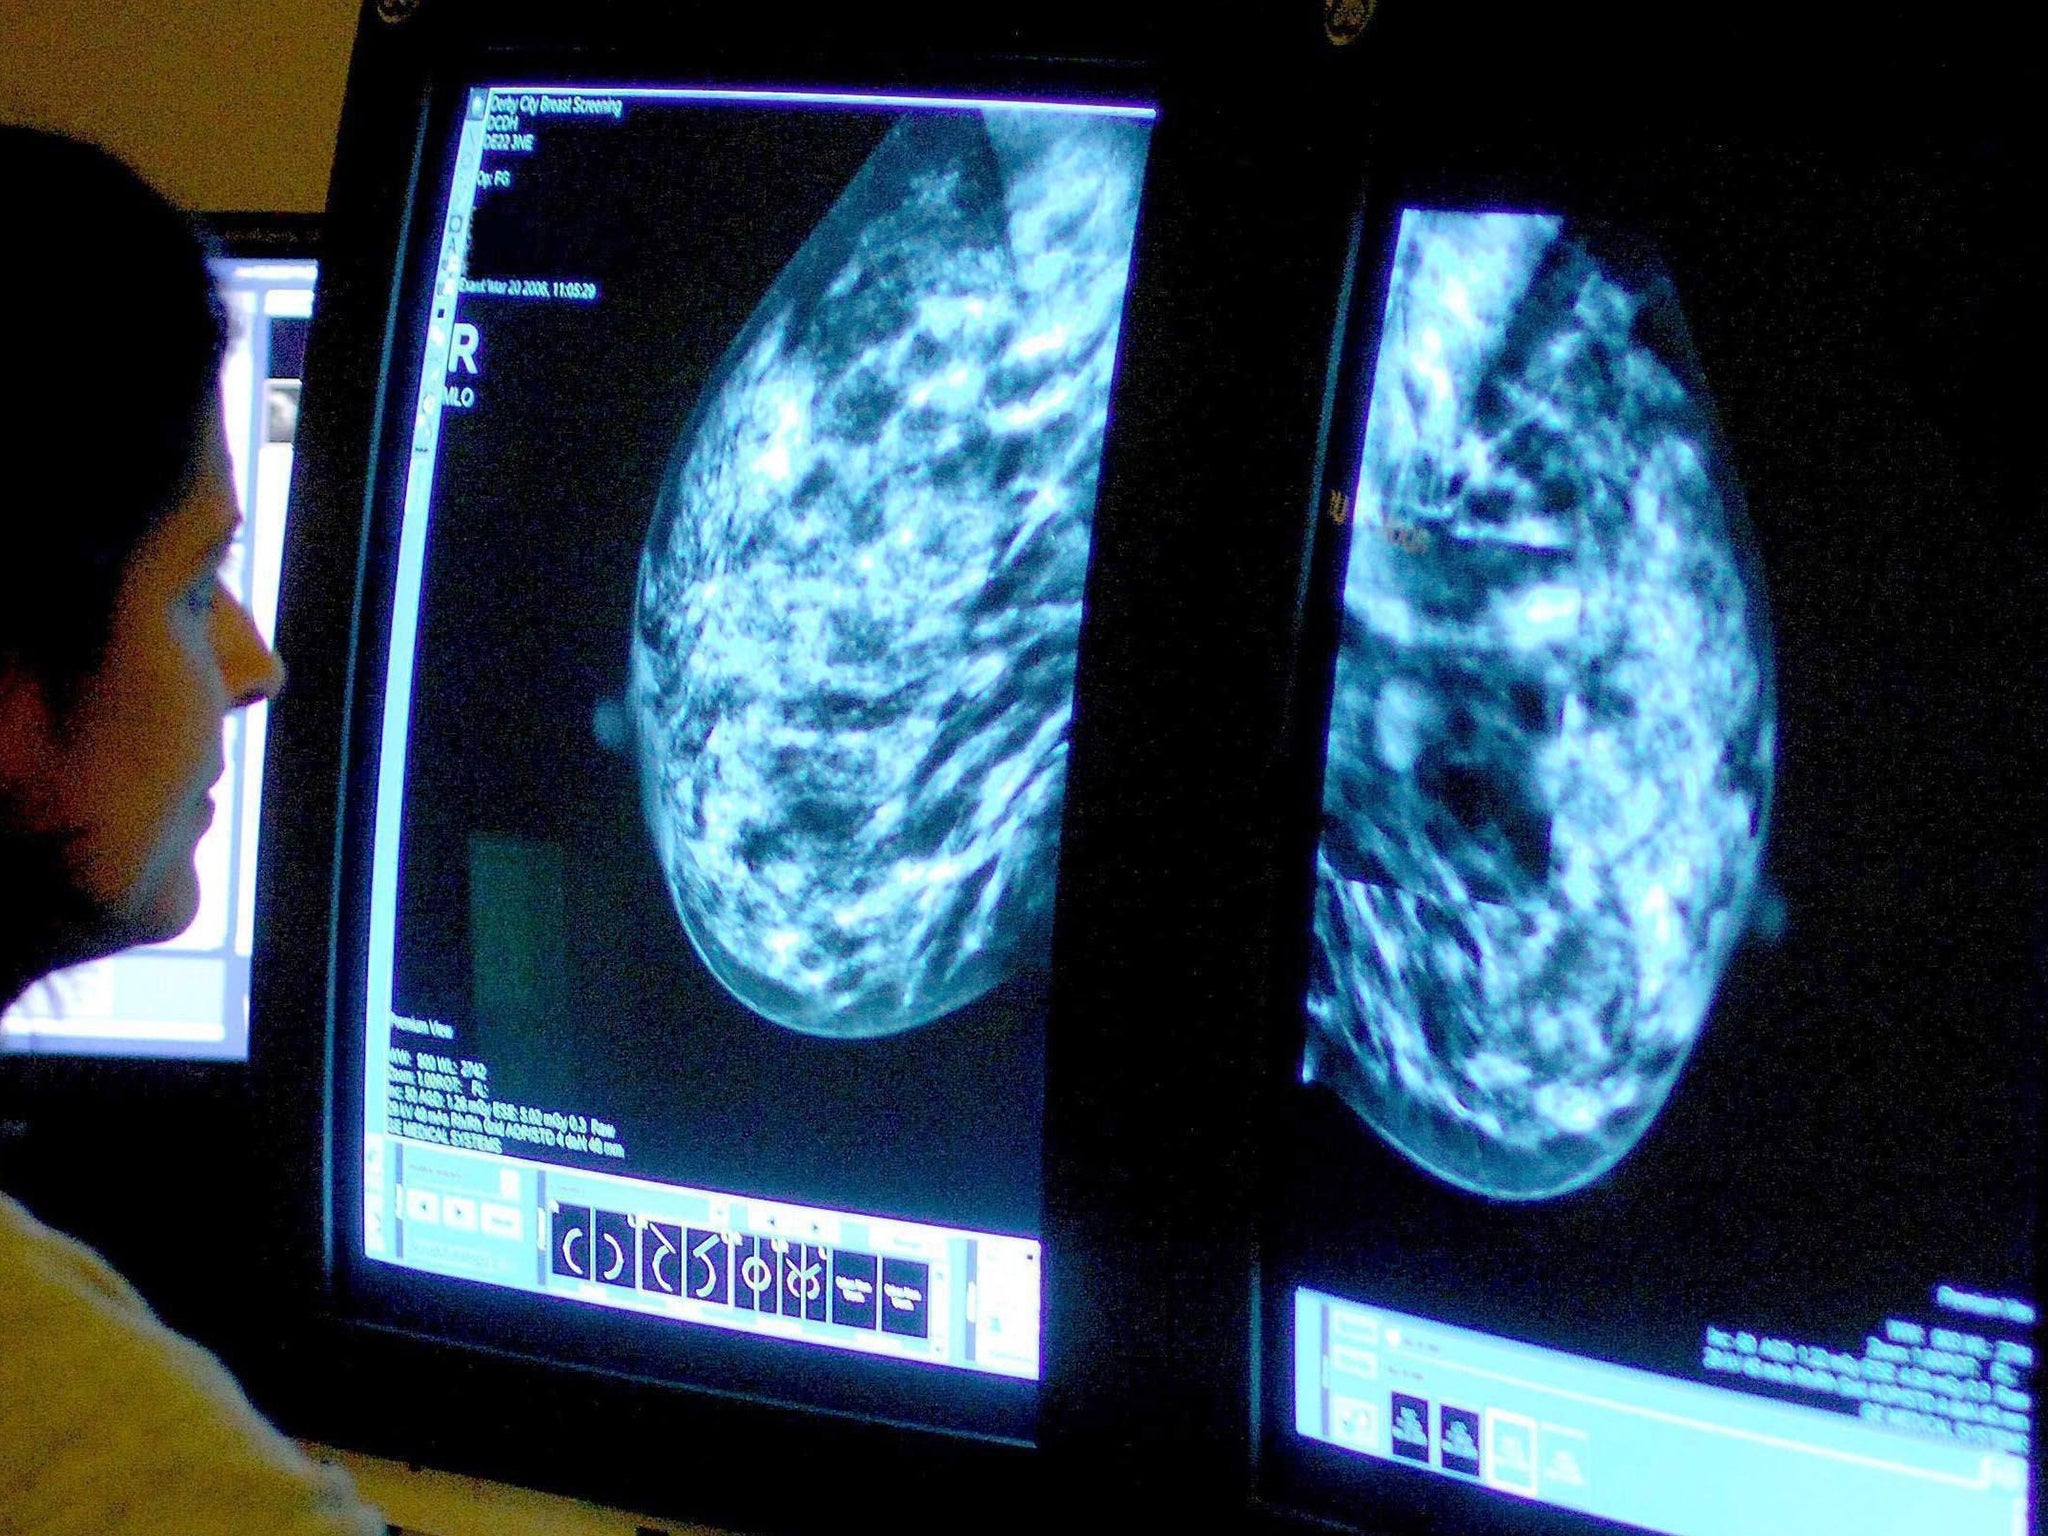 Scientists monitored more than 62,000 women over a period of 20 years to see how their breast cancer risk was affected by what they ate